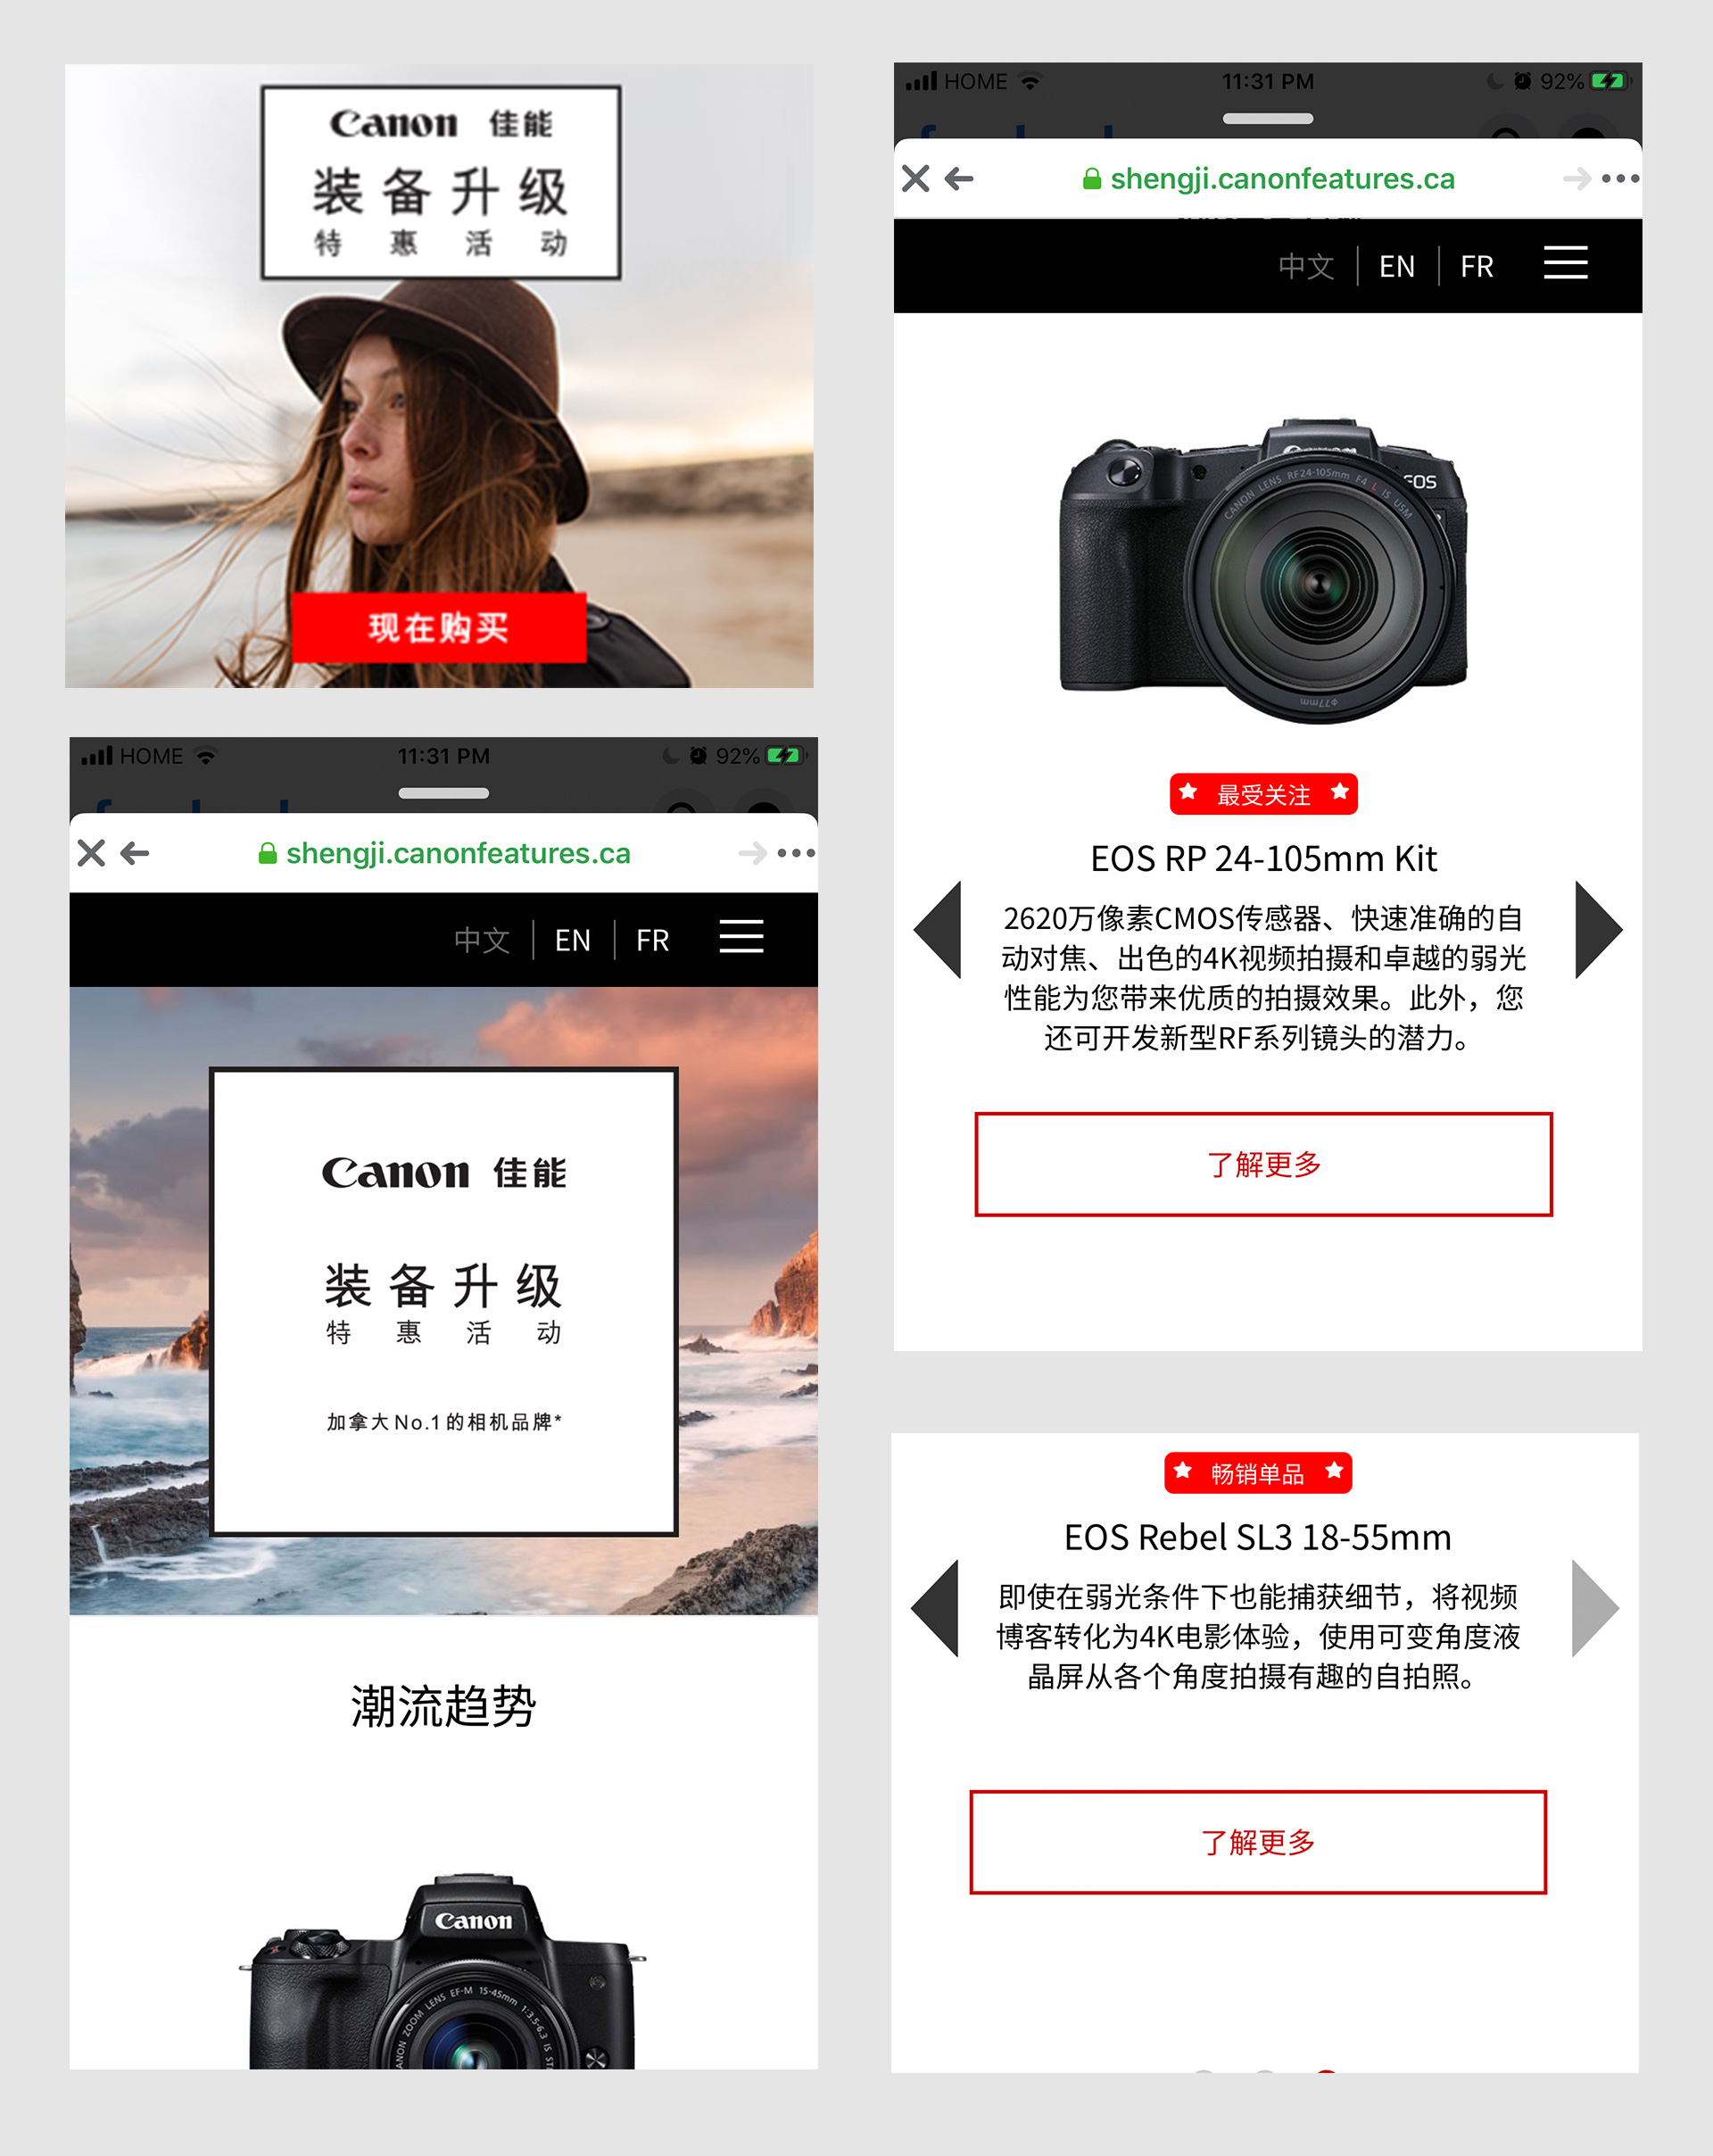 Canon Chinese